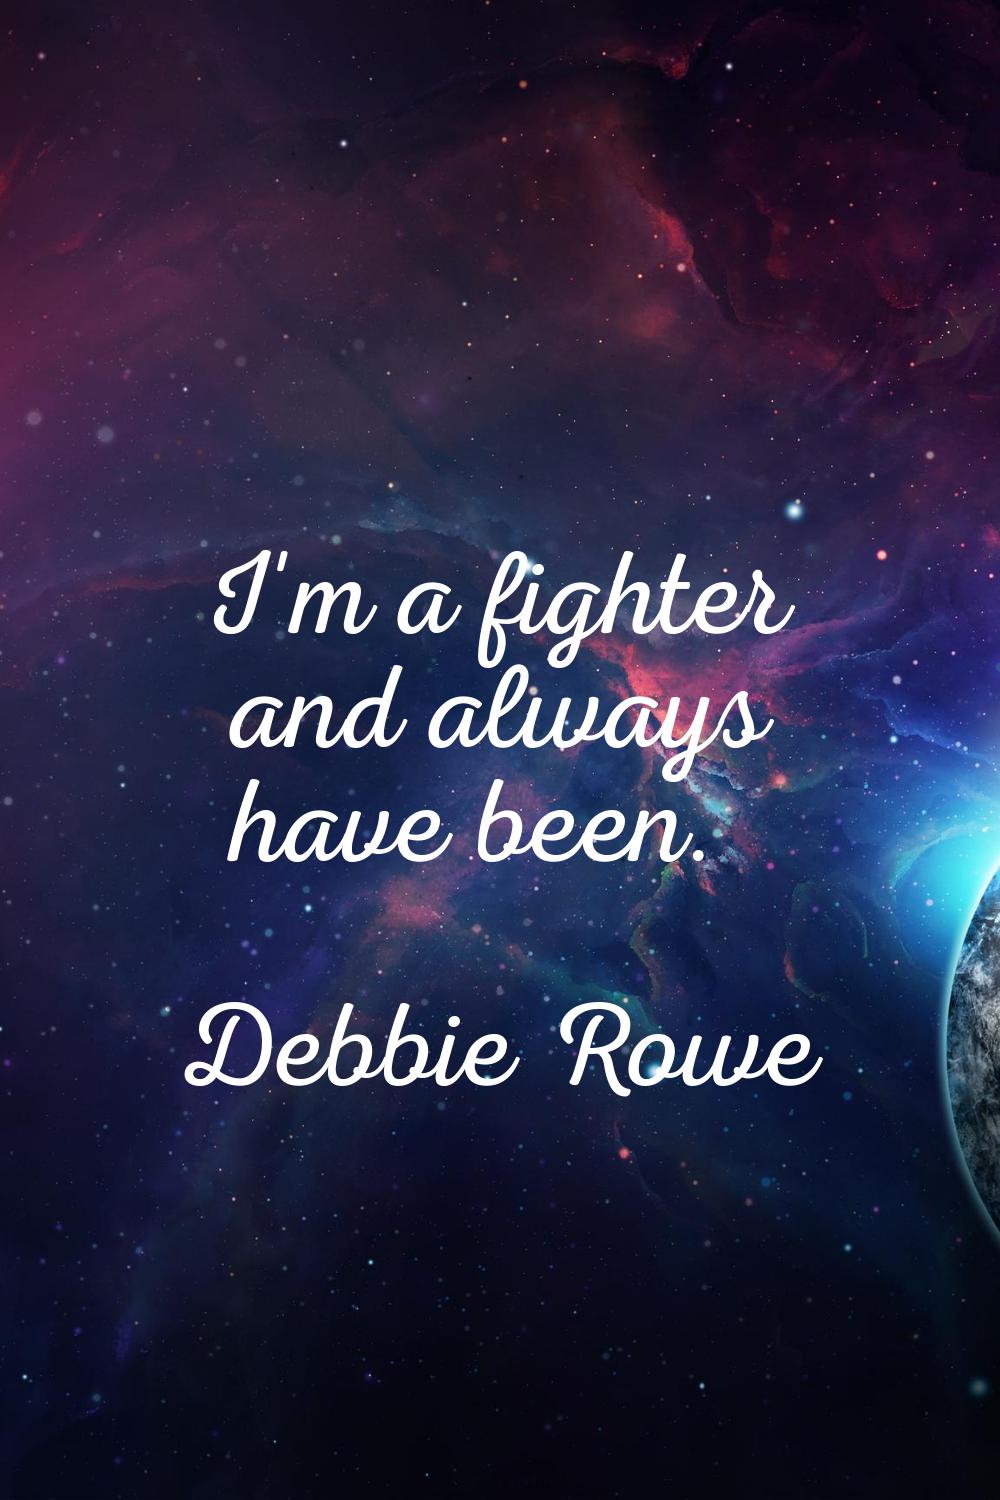 I'm a fighter and always have been.